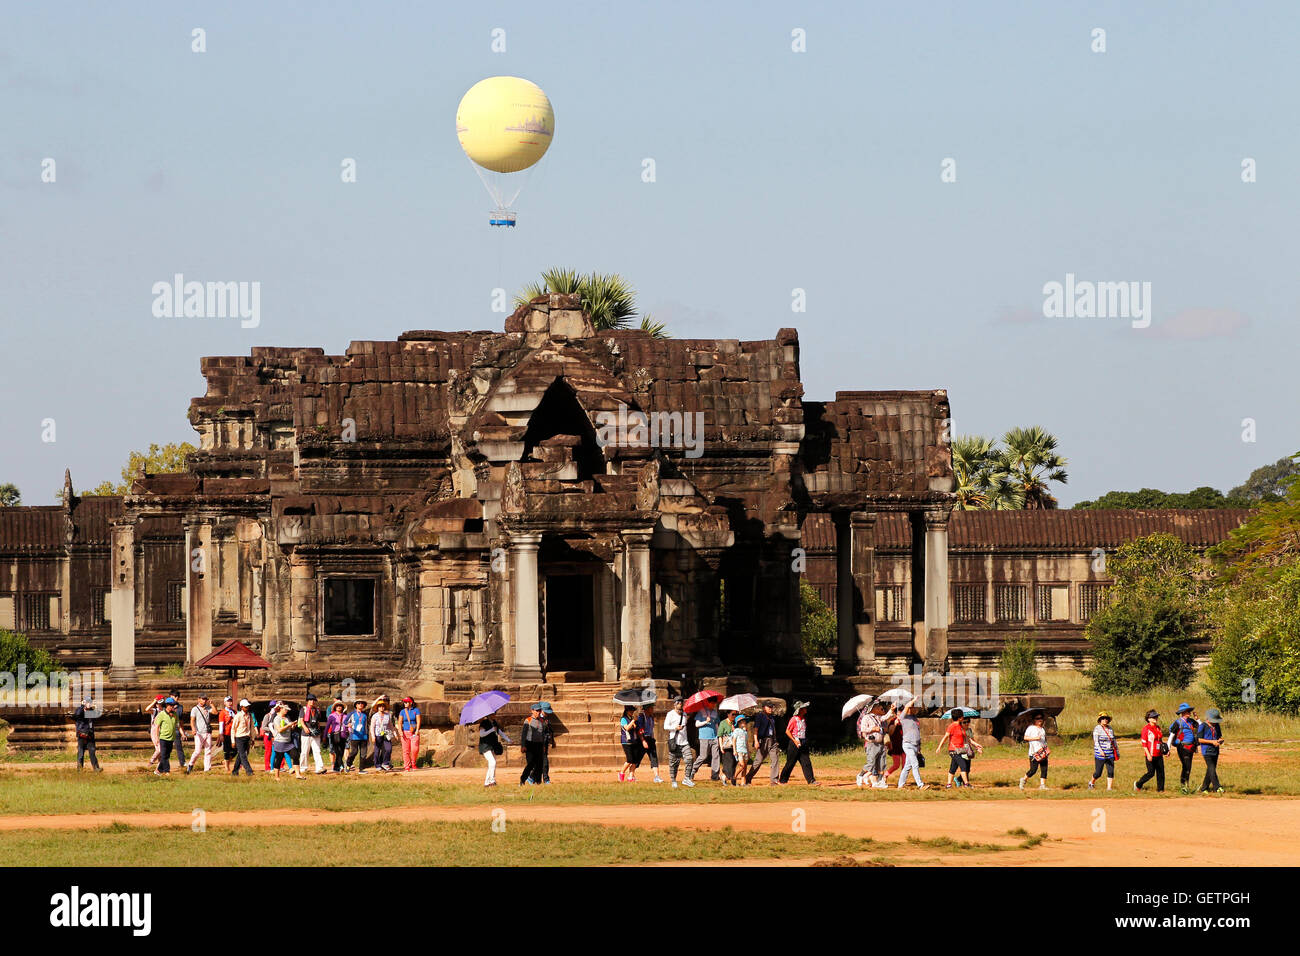 A group of tourists at Angkor Wat temple in Cambodia. Stock Photo